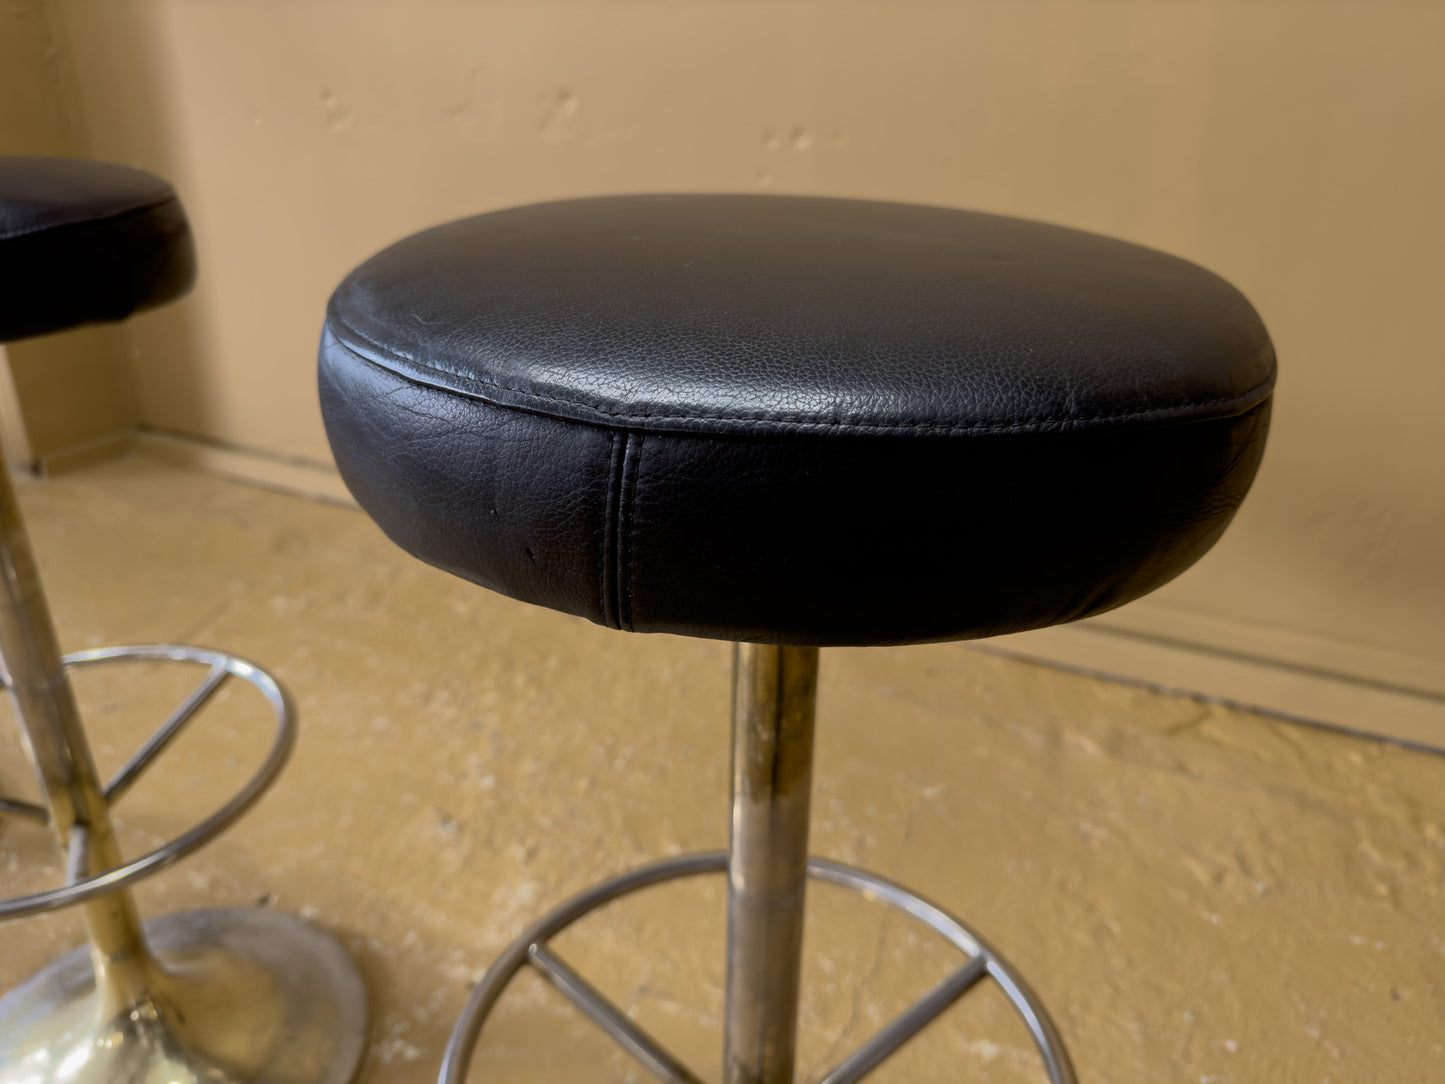 Chrome and Leather Barstools